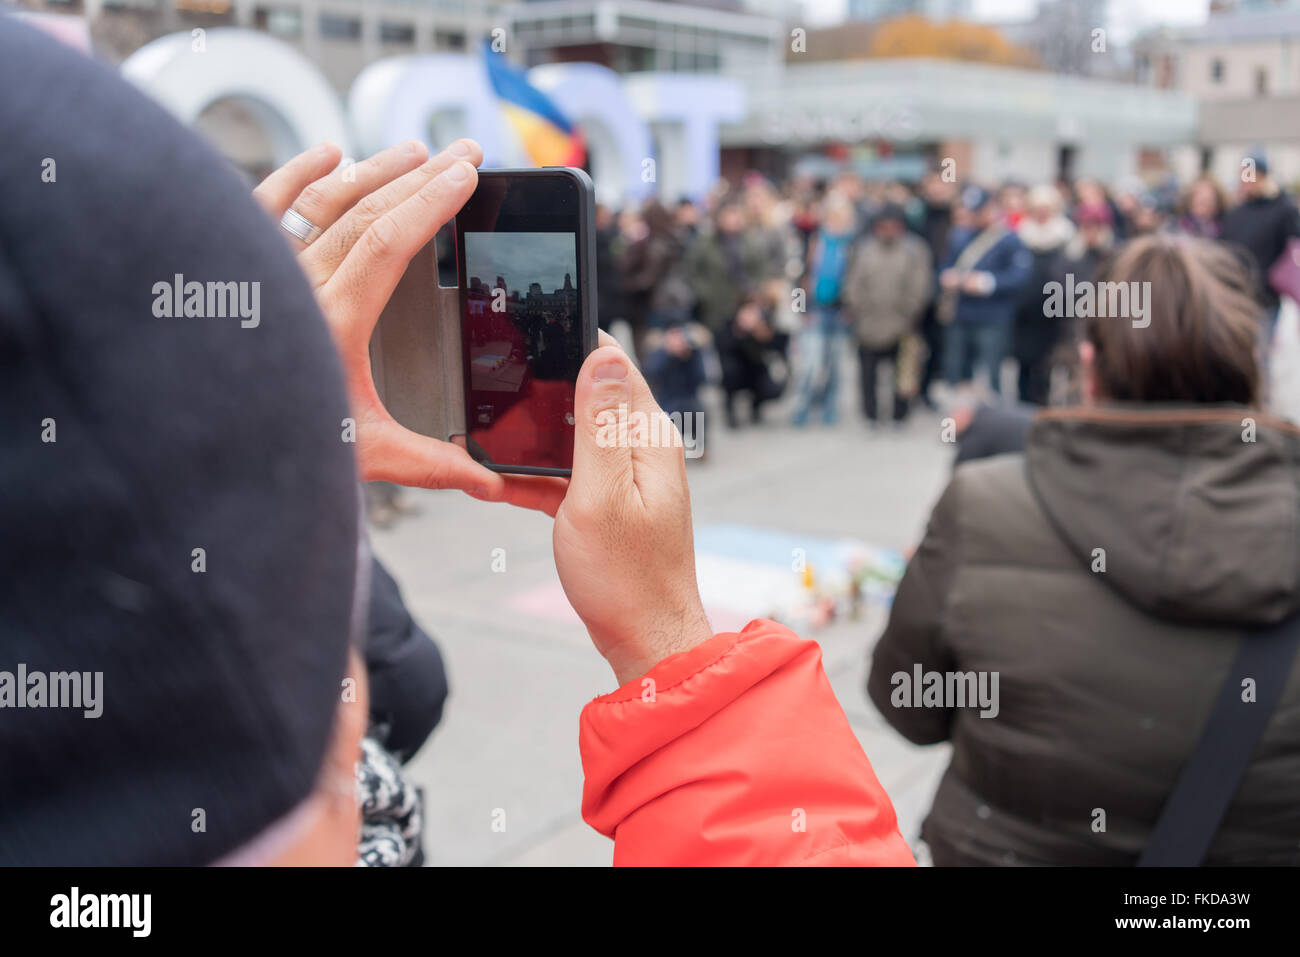 Man capturing an image with his mobile phone at Nathan Phillips Square, Toronto, Ontario, Canada Stock Photo